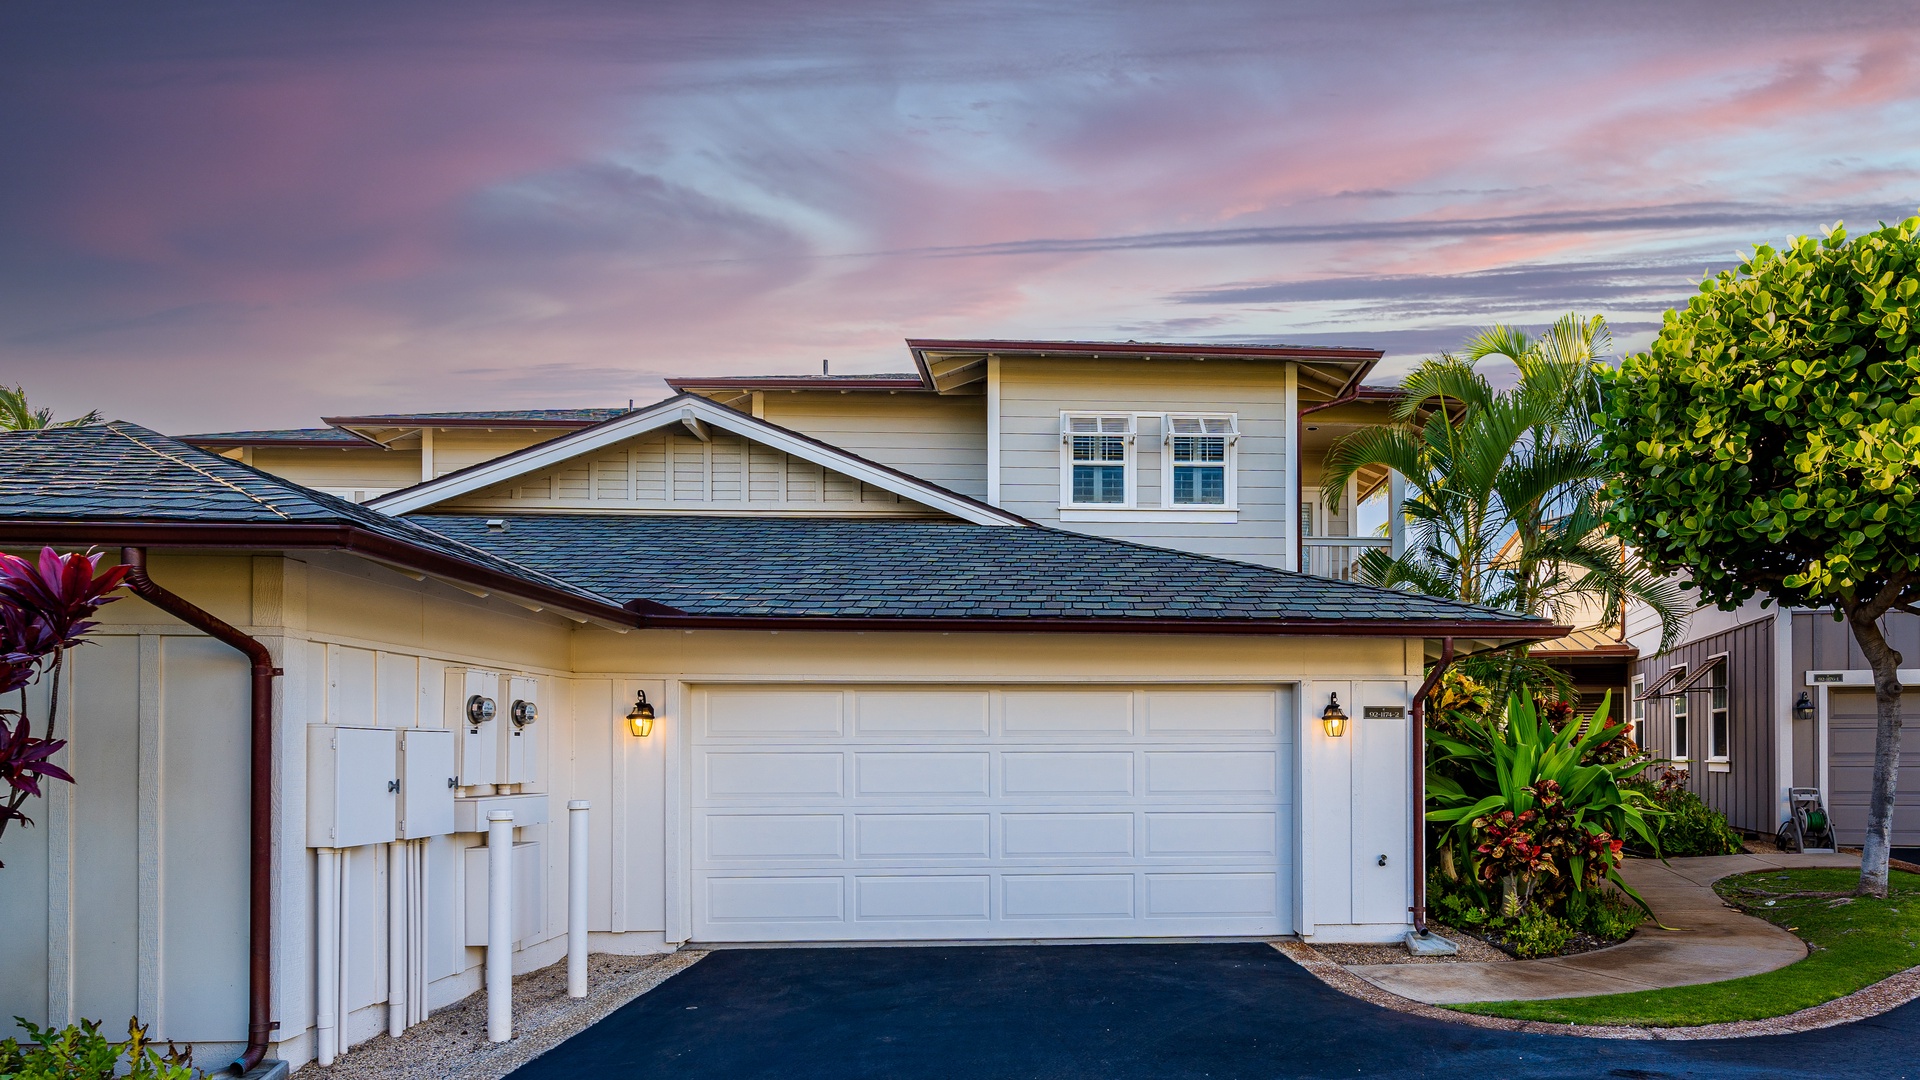 Kapolei Vacation Rentals, Coconut Plantation 1174-2 - The paved area and garage of the home.